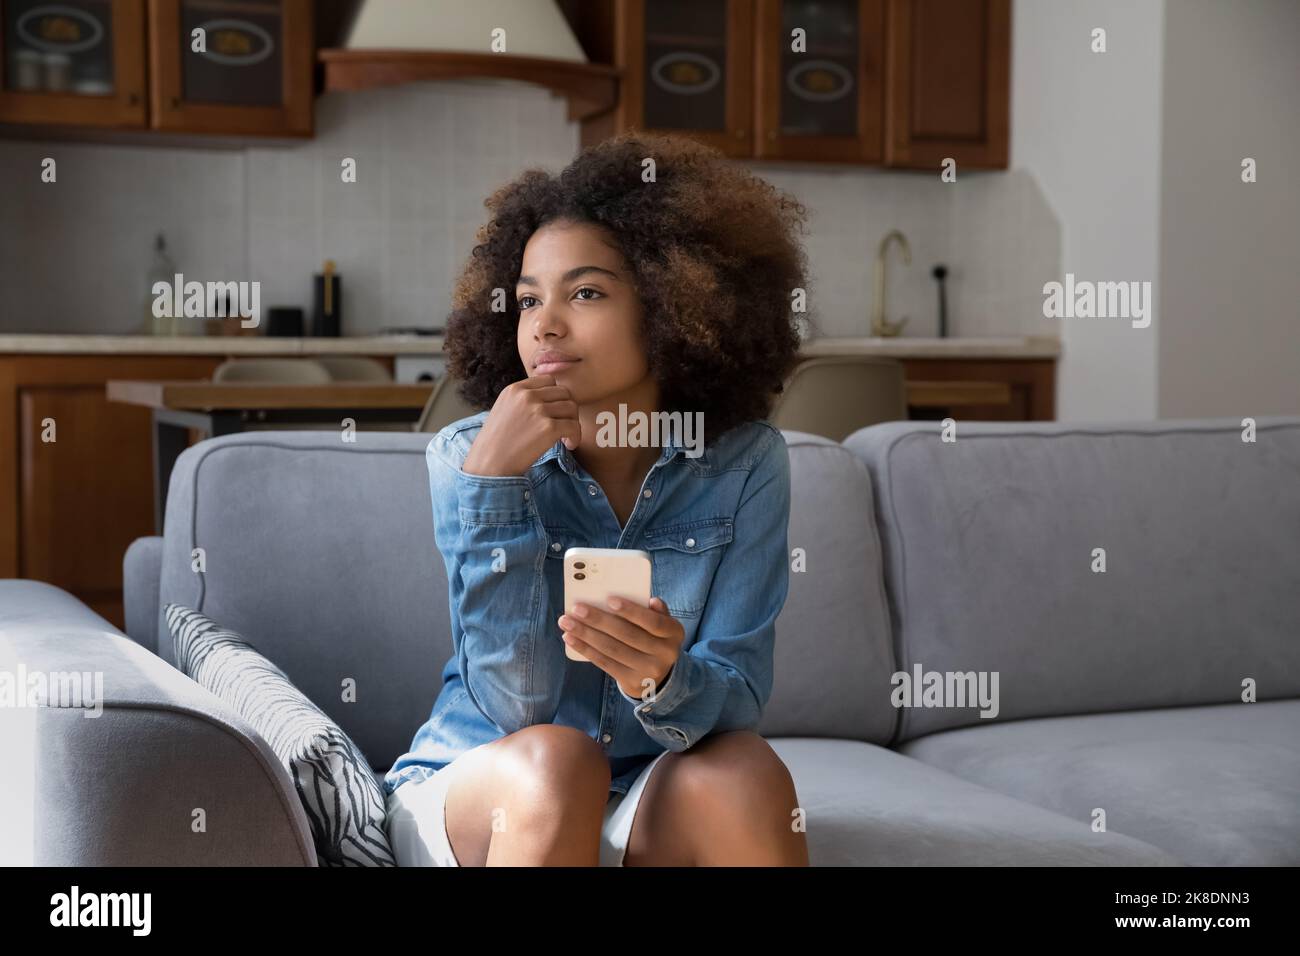 Pretty pensive African teenager girl sit on sofa with smartphone Stock Photo